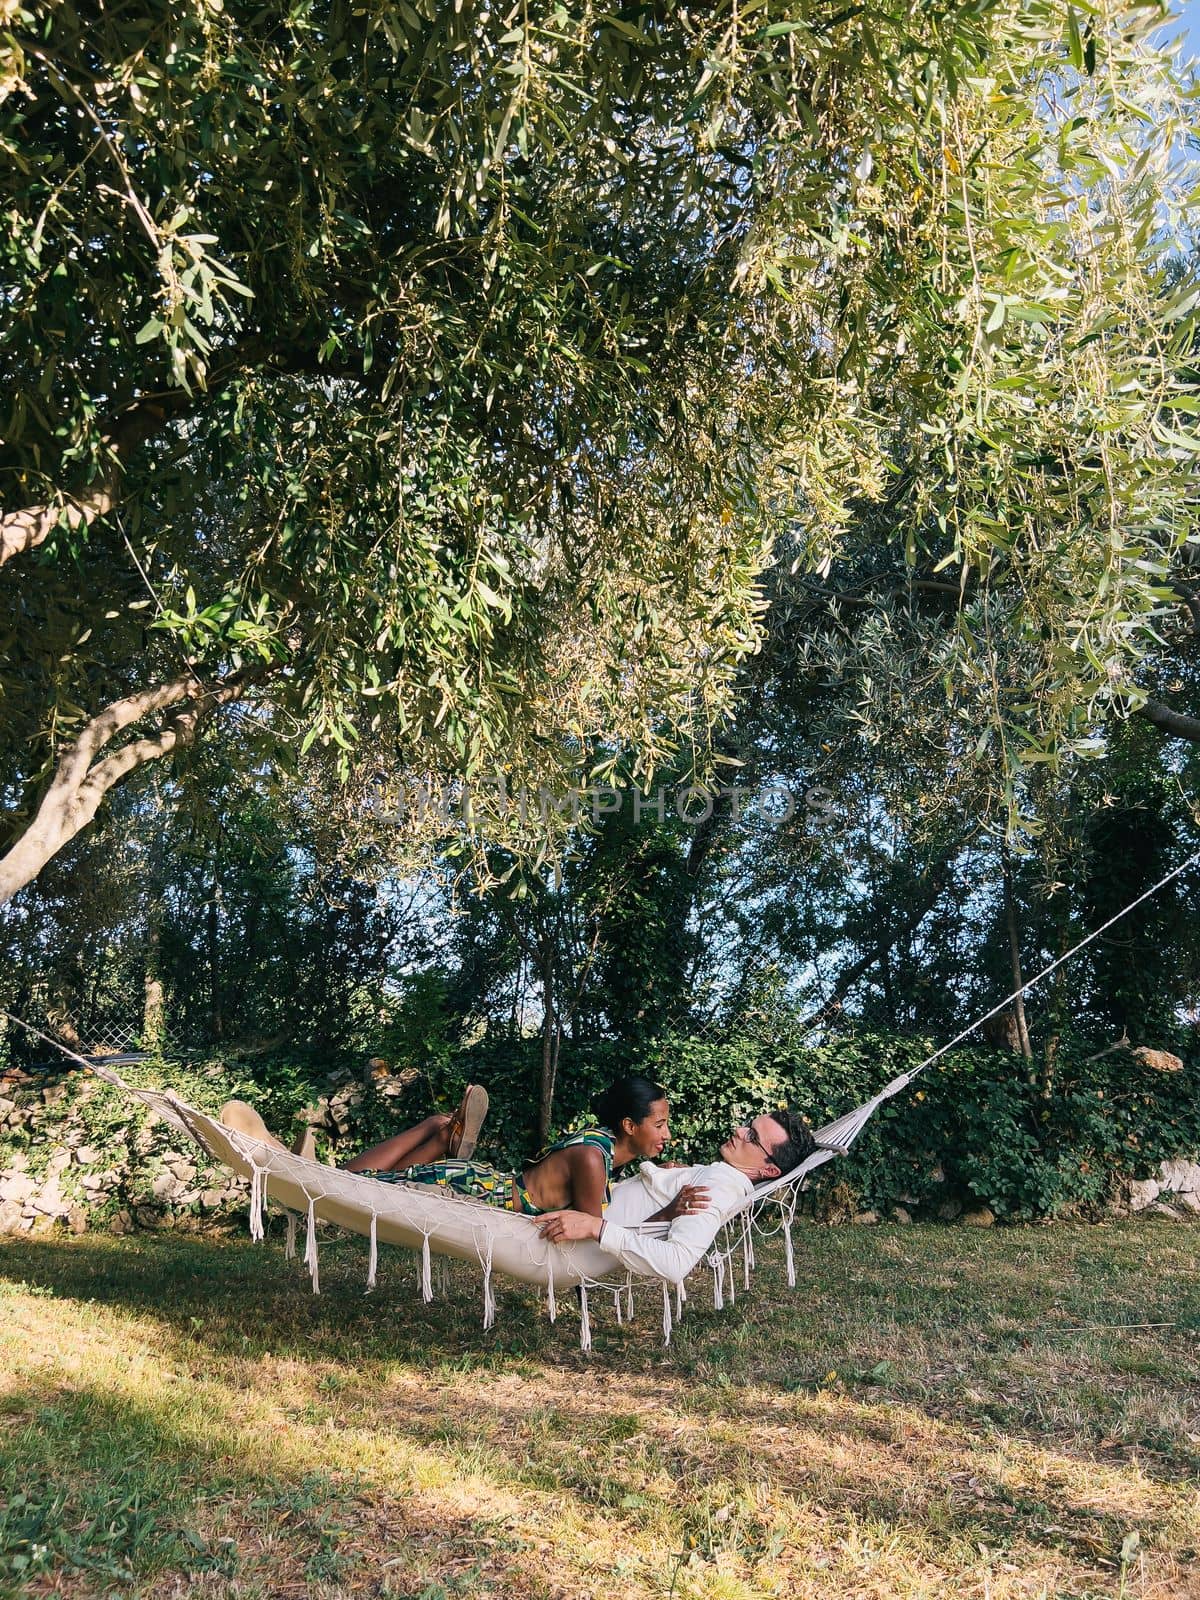 Smiling woman lying on man in hammock in garden. High quality photo